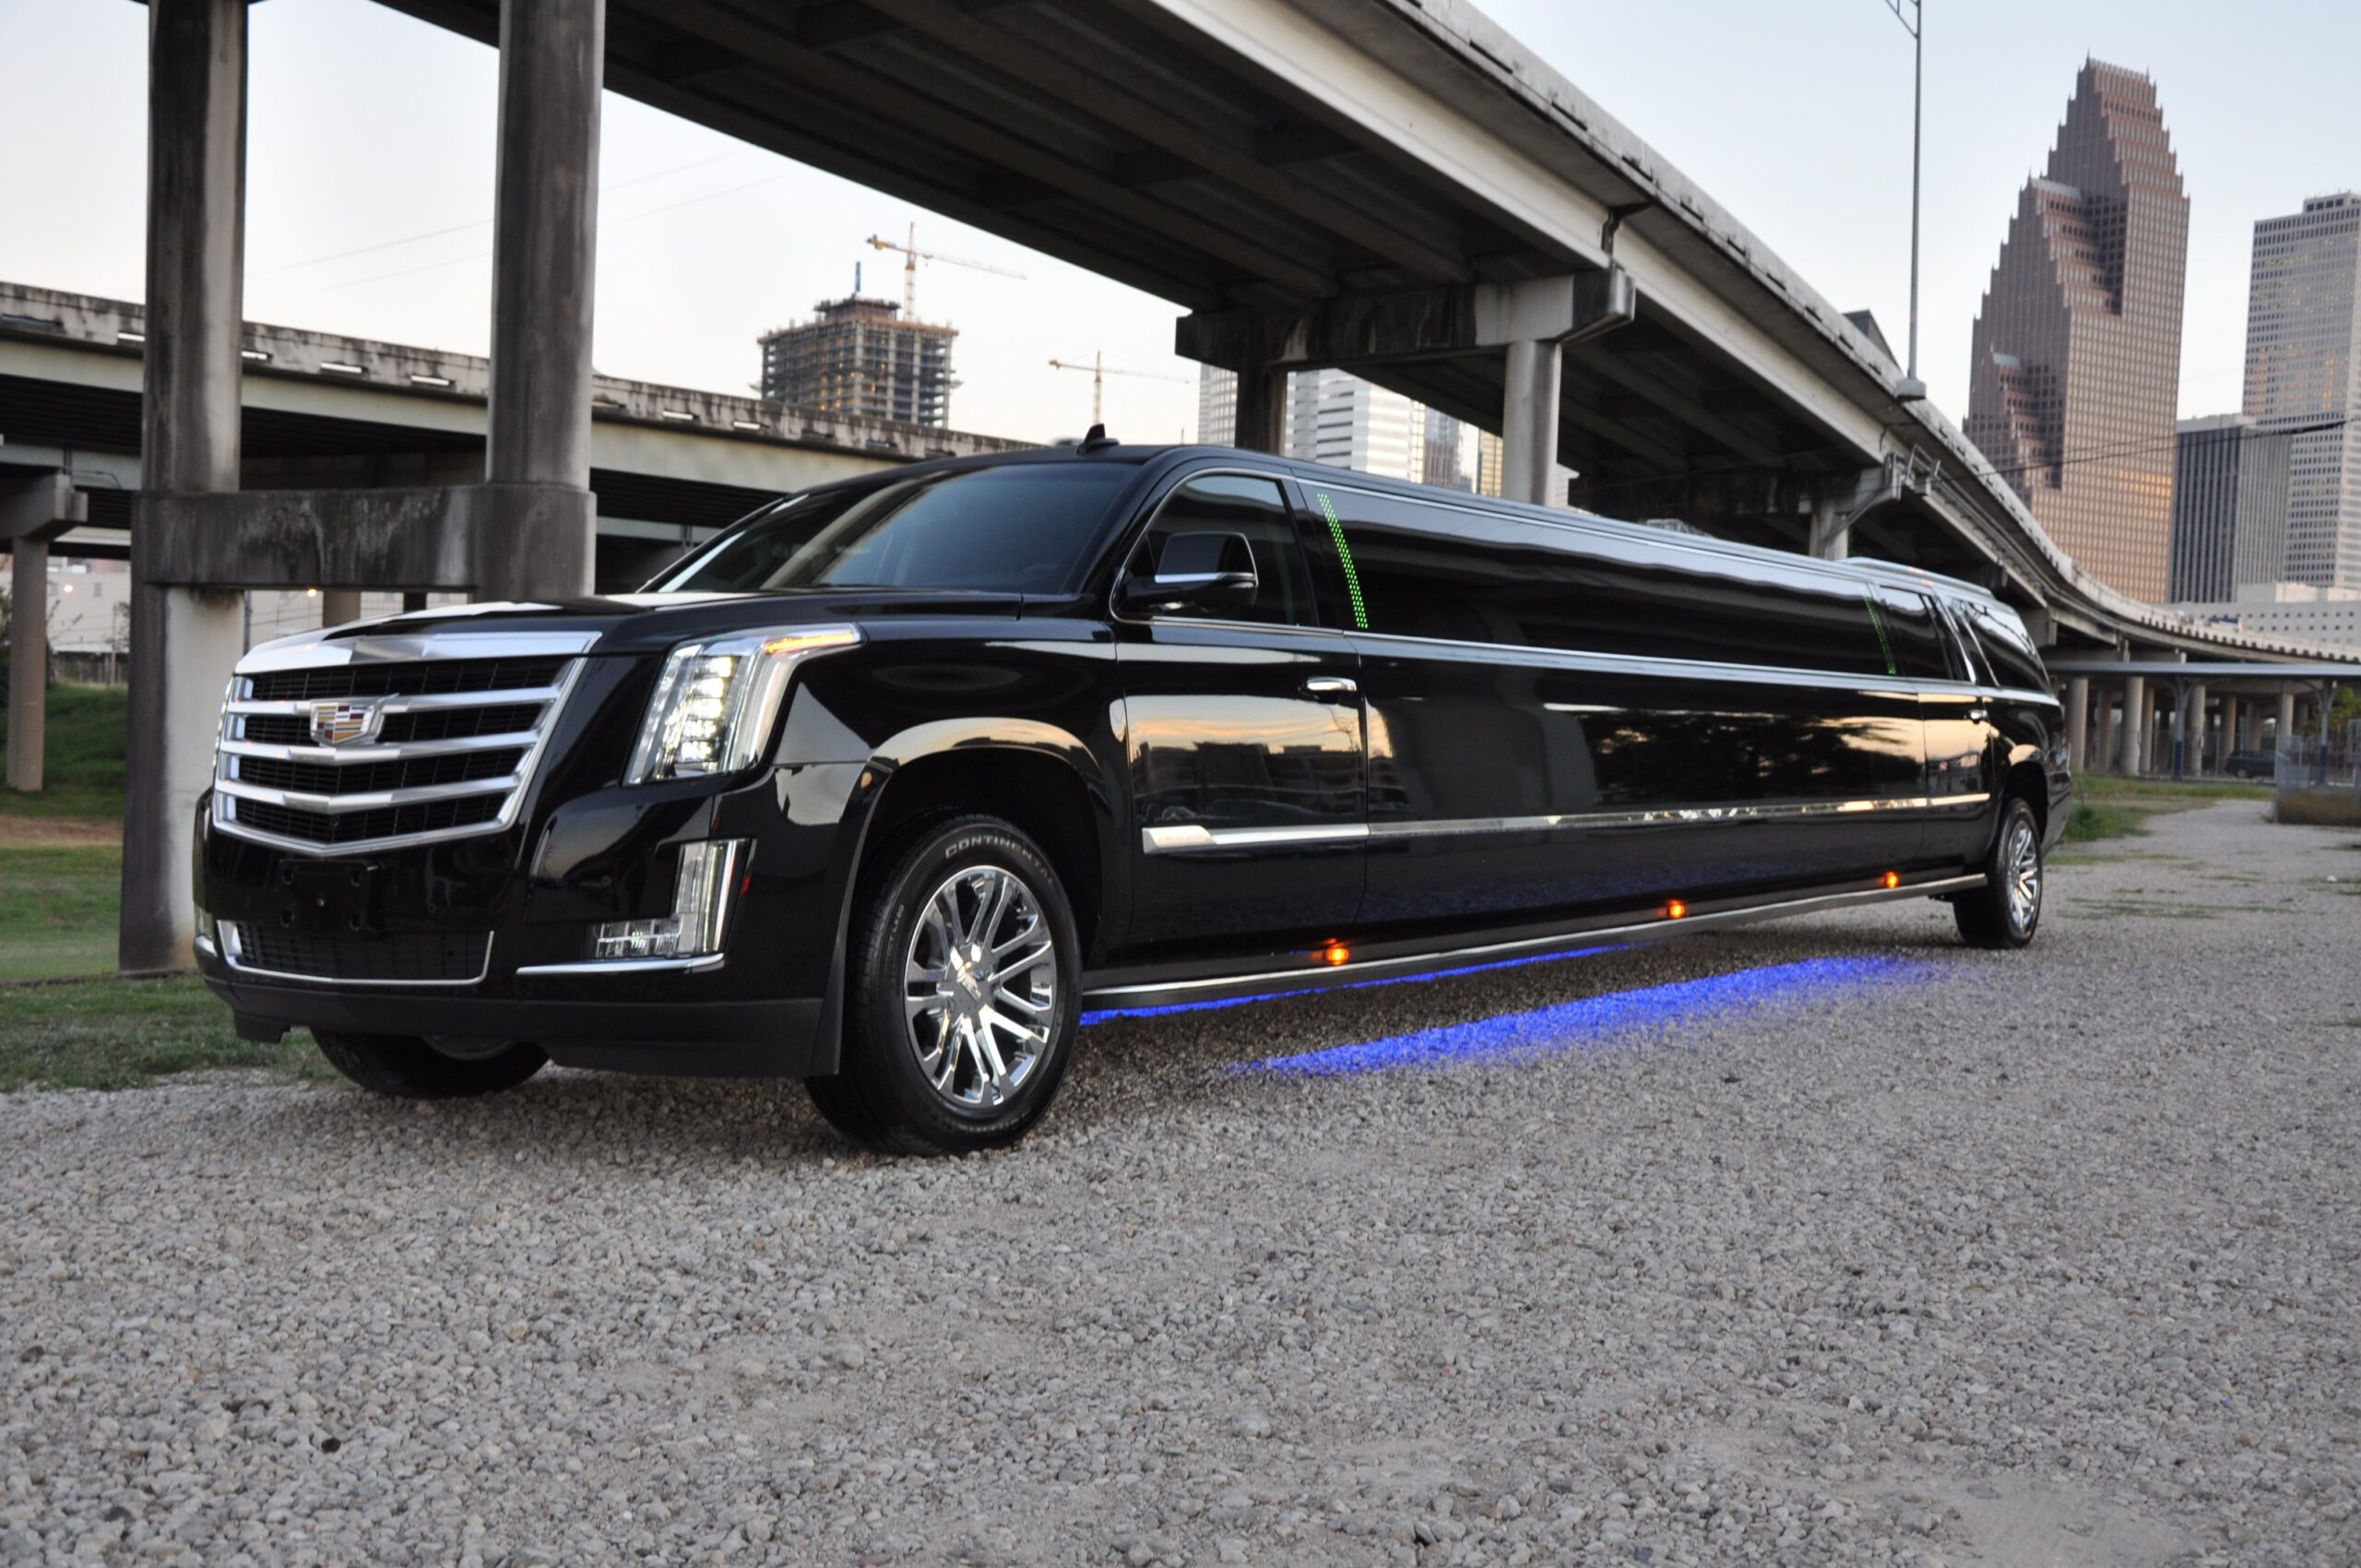 Limo service katy tx offered by Katy Limo has no match in the market.